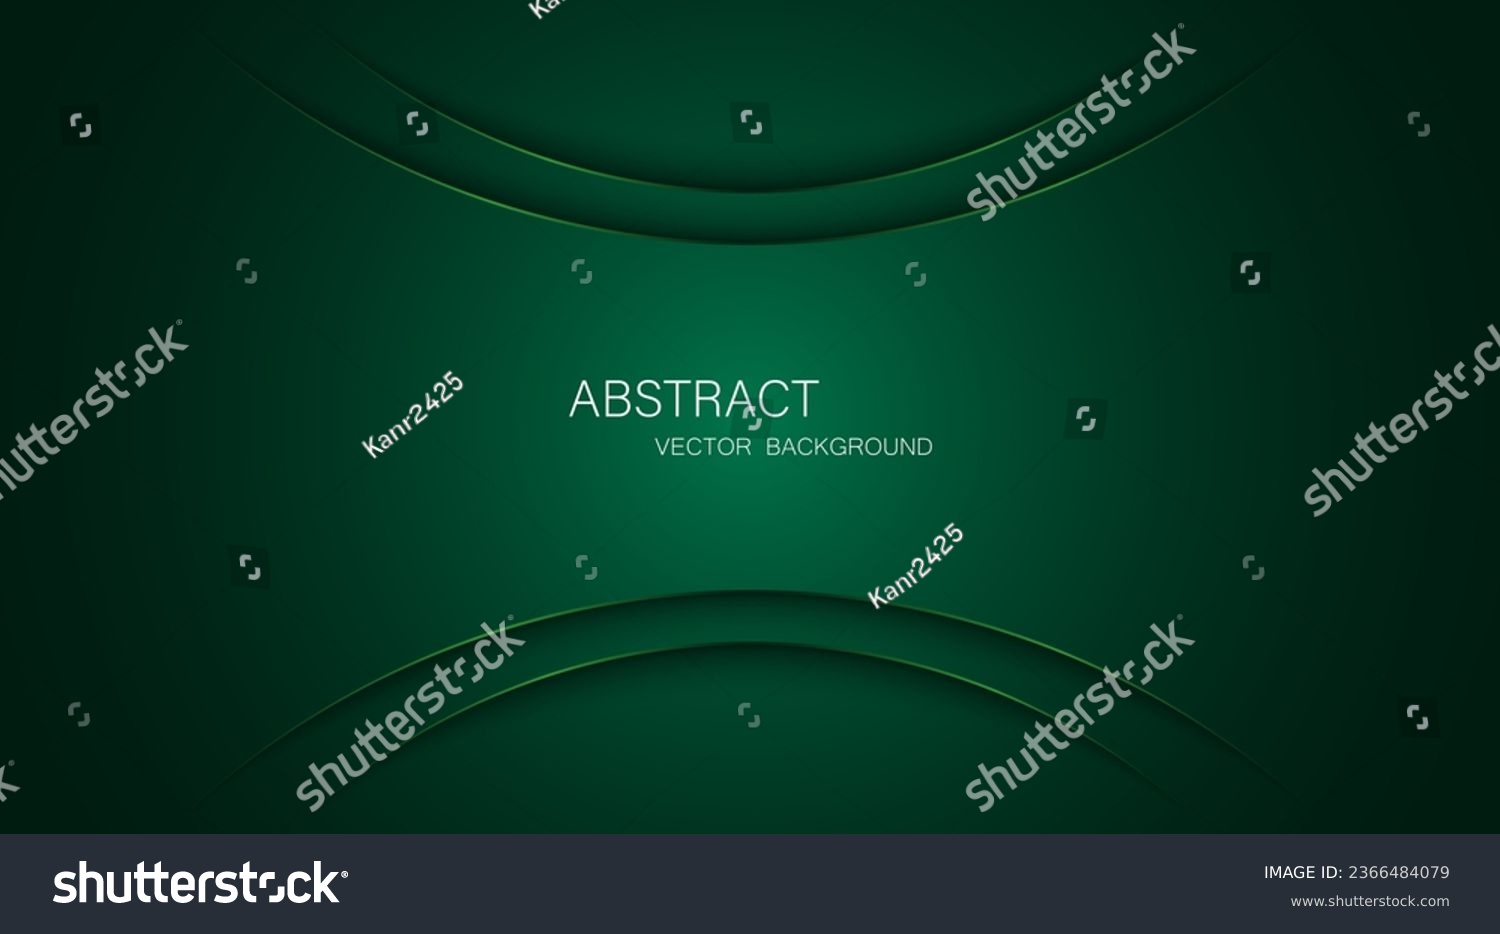 Abstract dark green background with green glowing lines, free space for design.	 #2366484079